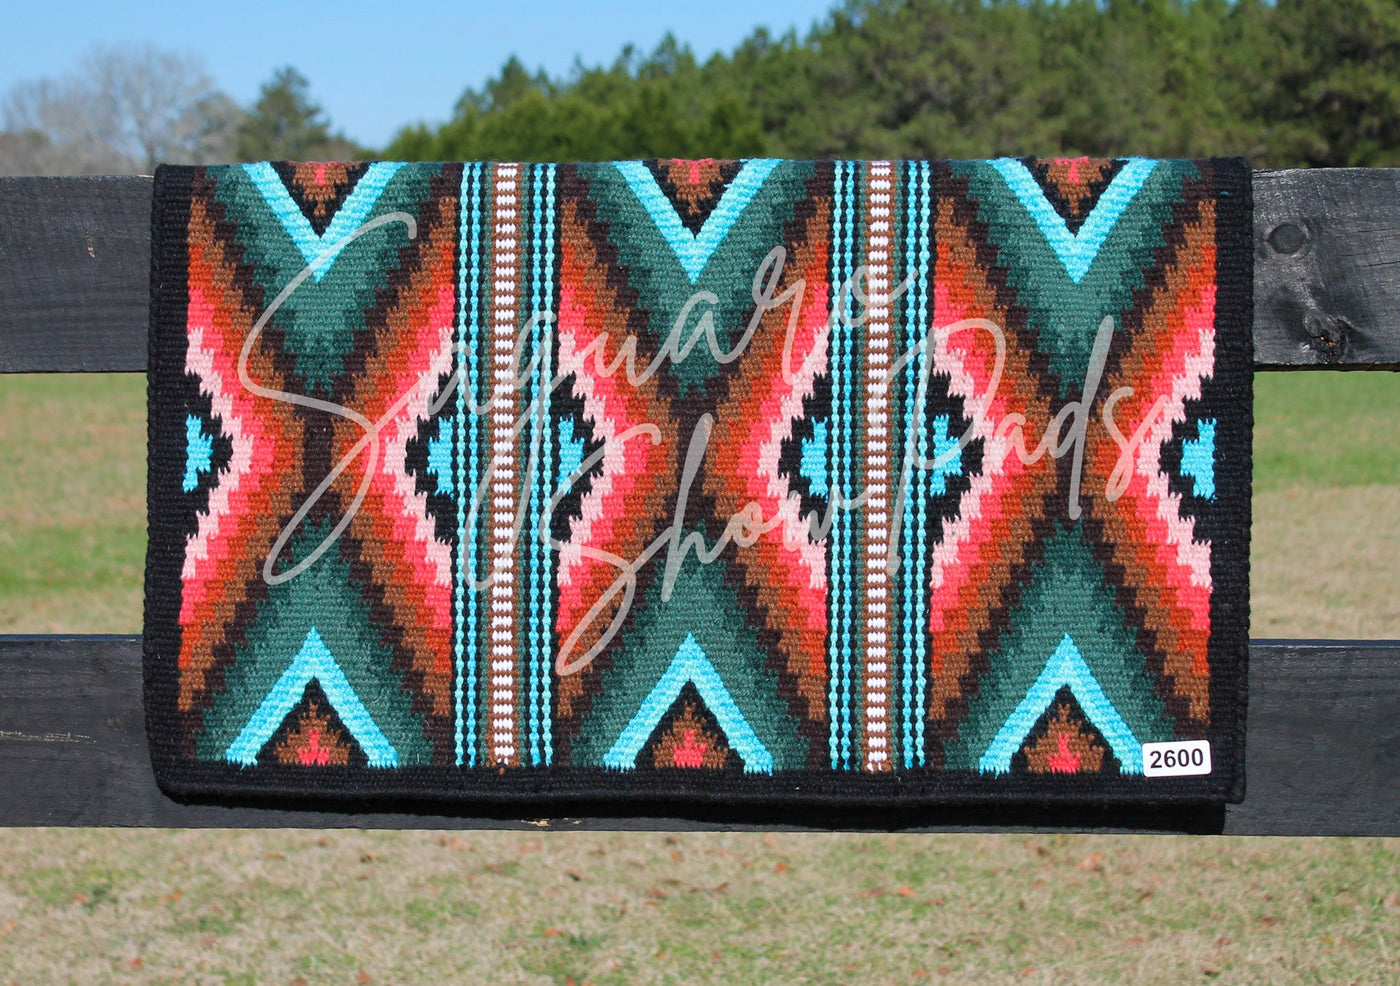 #2600 "X-Factor" Ranch Pad - Re-Order